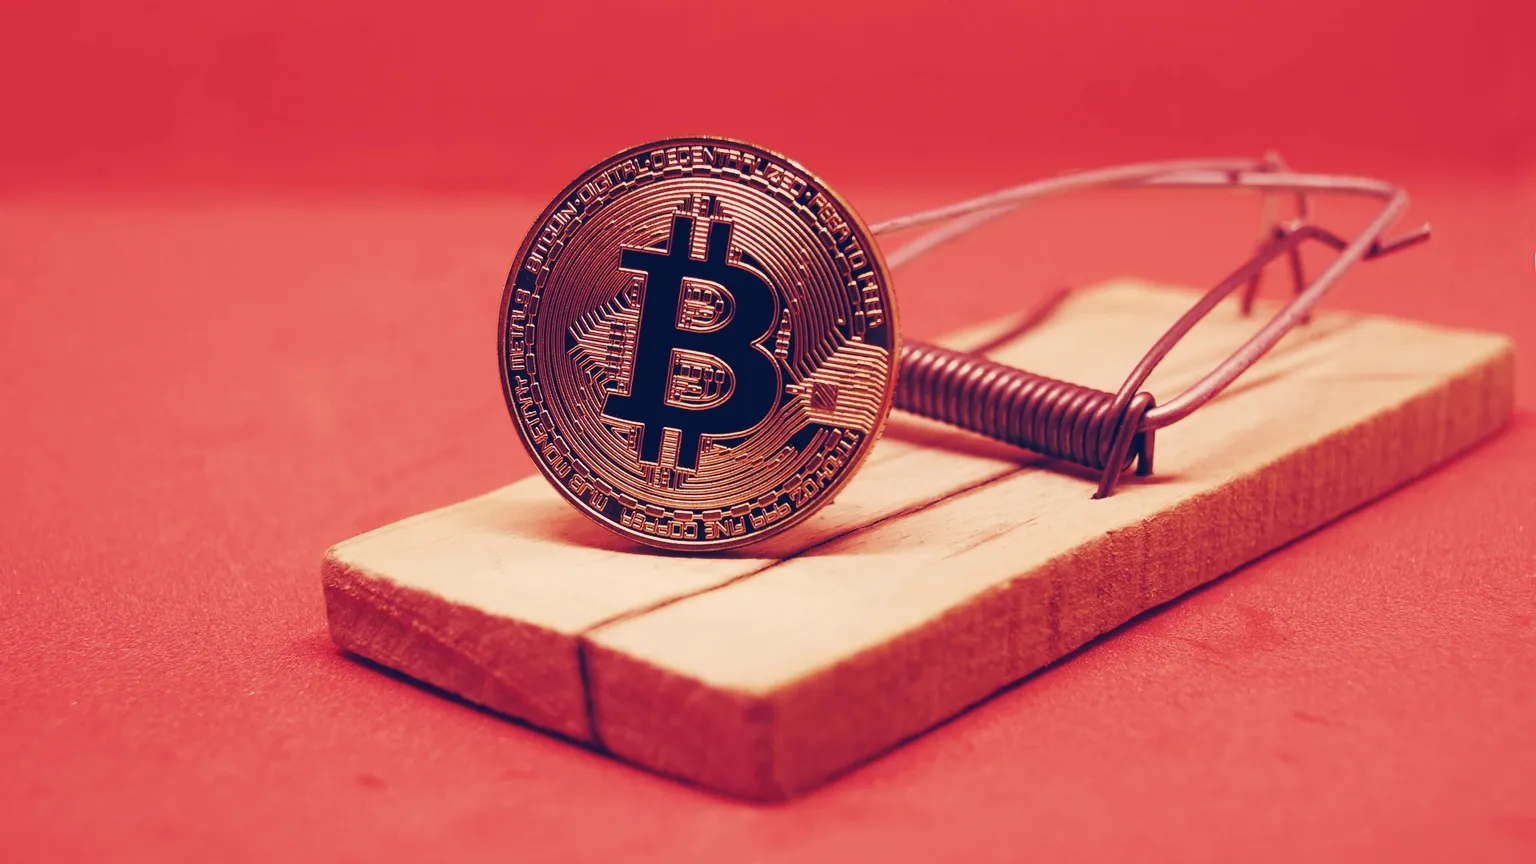 Fraudsters are using personal data to lure victims into an alleged Bitcoin scam. (Image: Shutterstock)